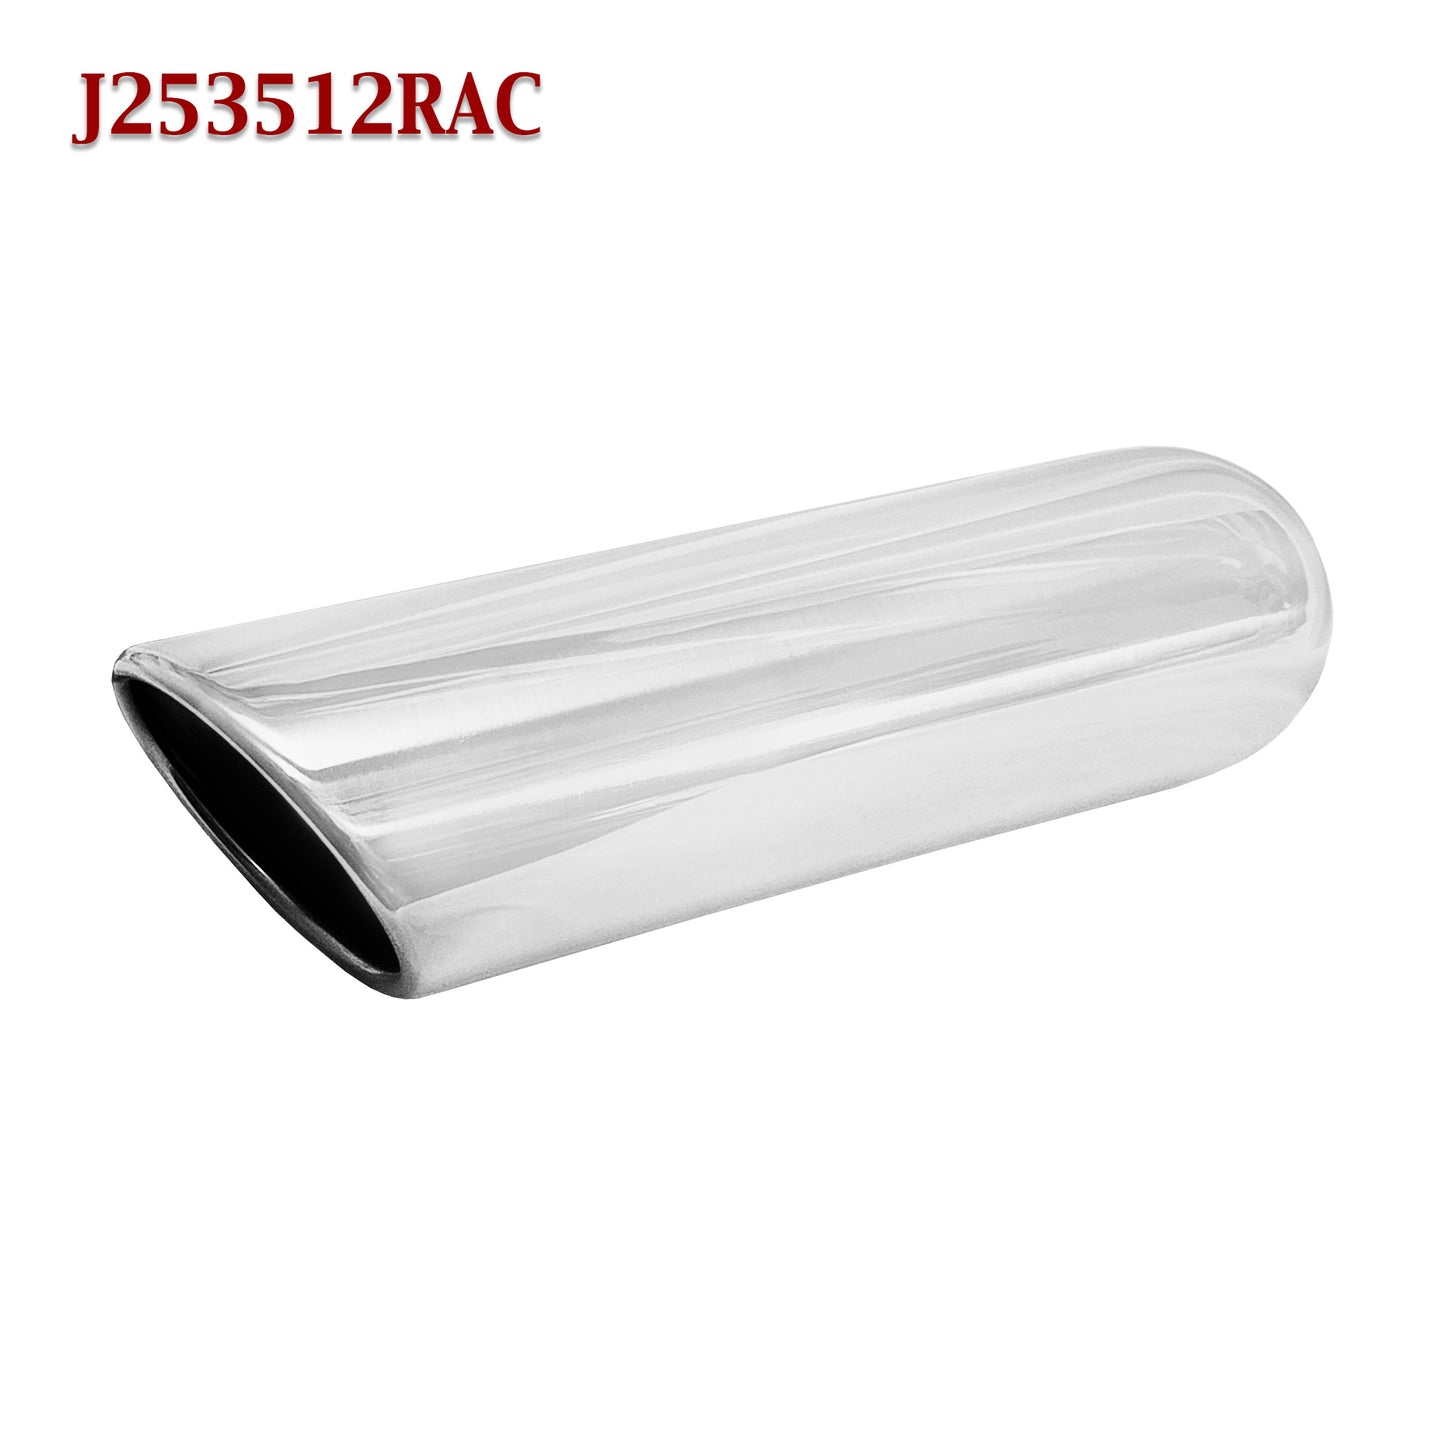 J253512RAC 2.5" Stainless Round Truck Exhaust Tip 2 1/2" In 3 1/2" Out 12" Long